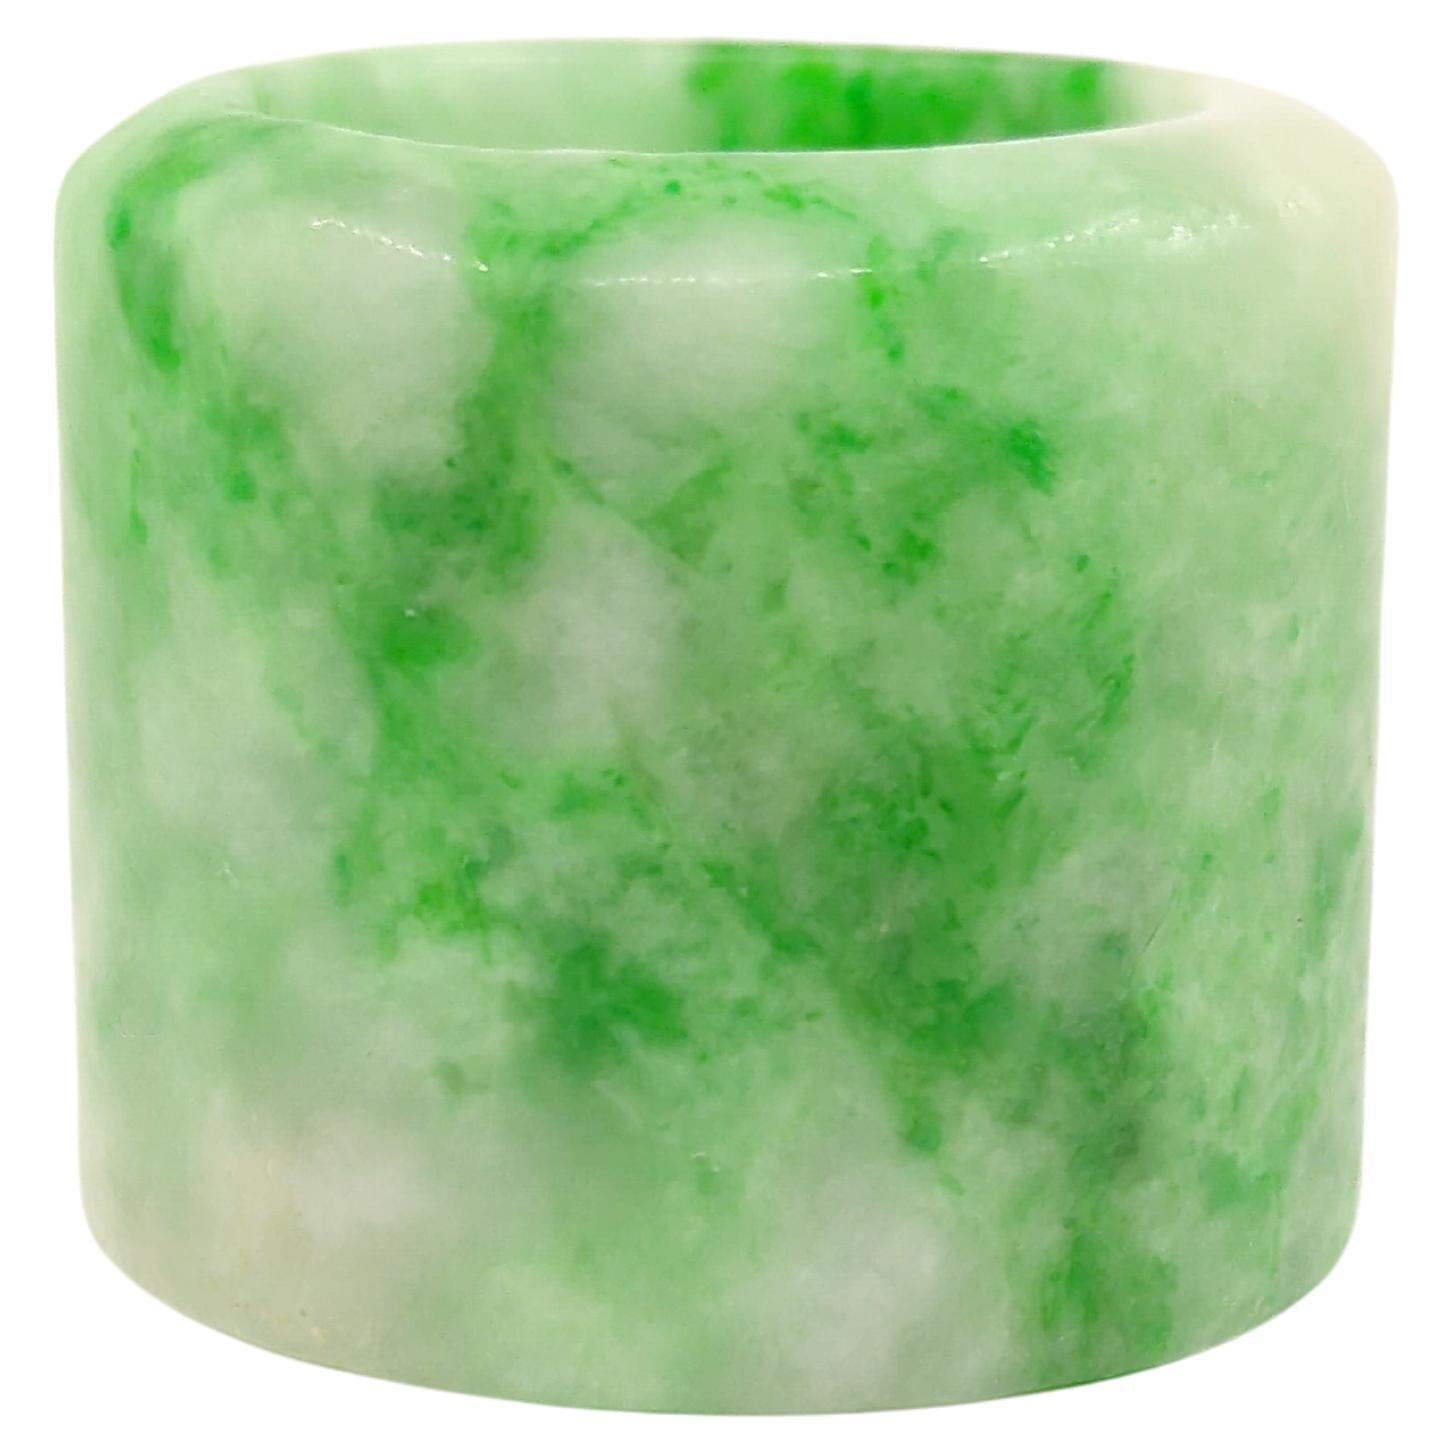 Fine antique Chinese hand carved jadeite archer's thumb ring with natural mottled emerald green color inclusions on white ground, the natural jadeite material is translucent and untreated.

This is a very fine example of Chinese jadeite thumb rings